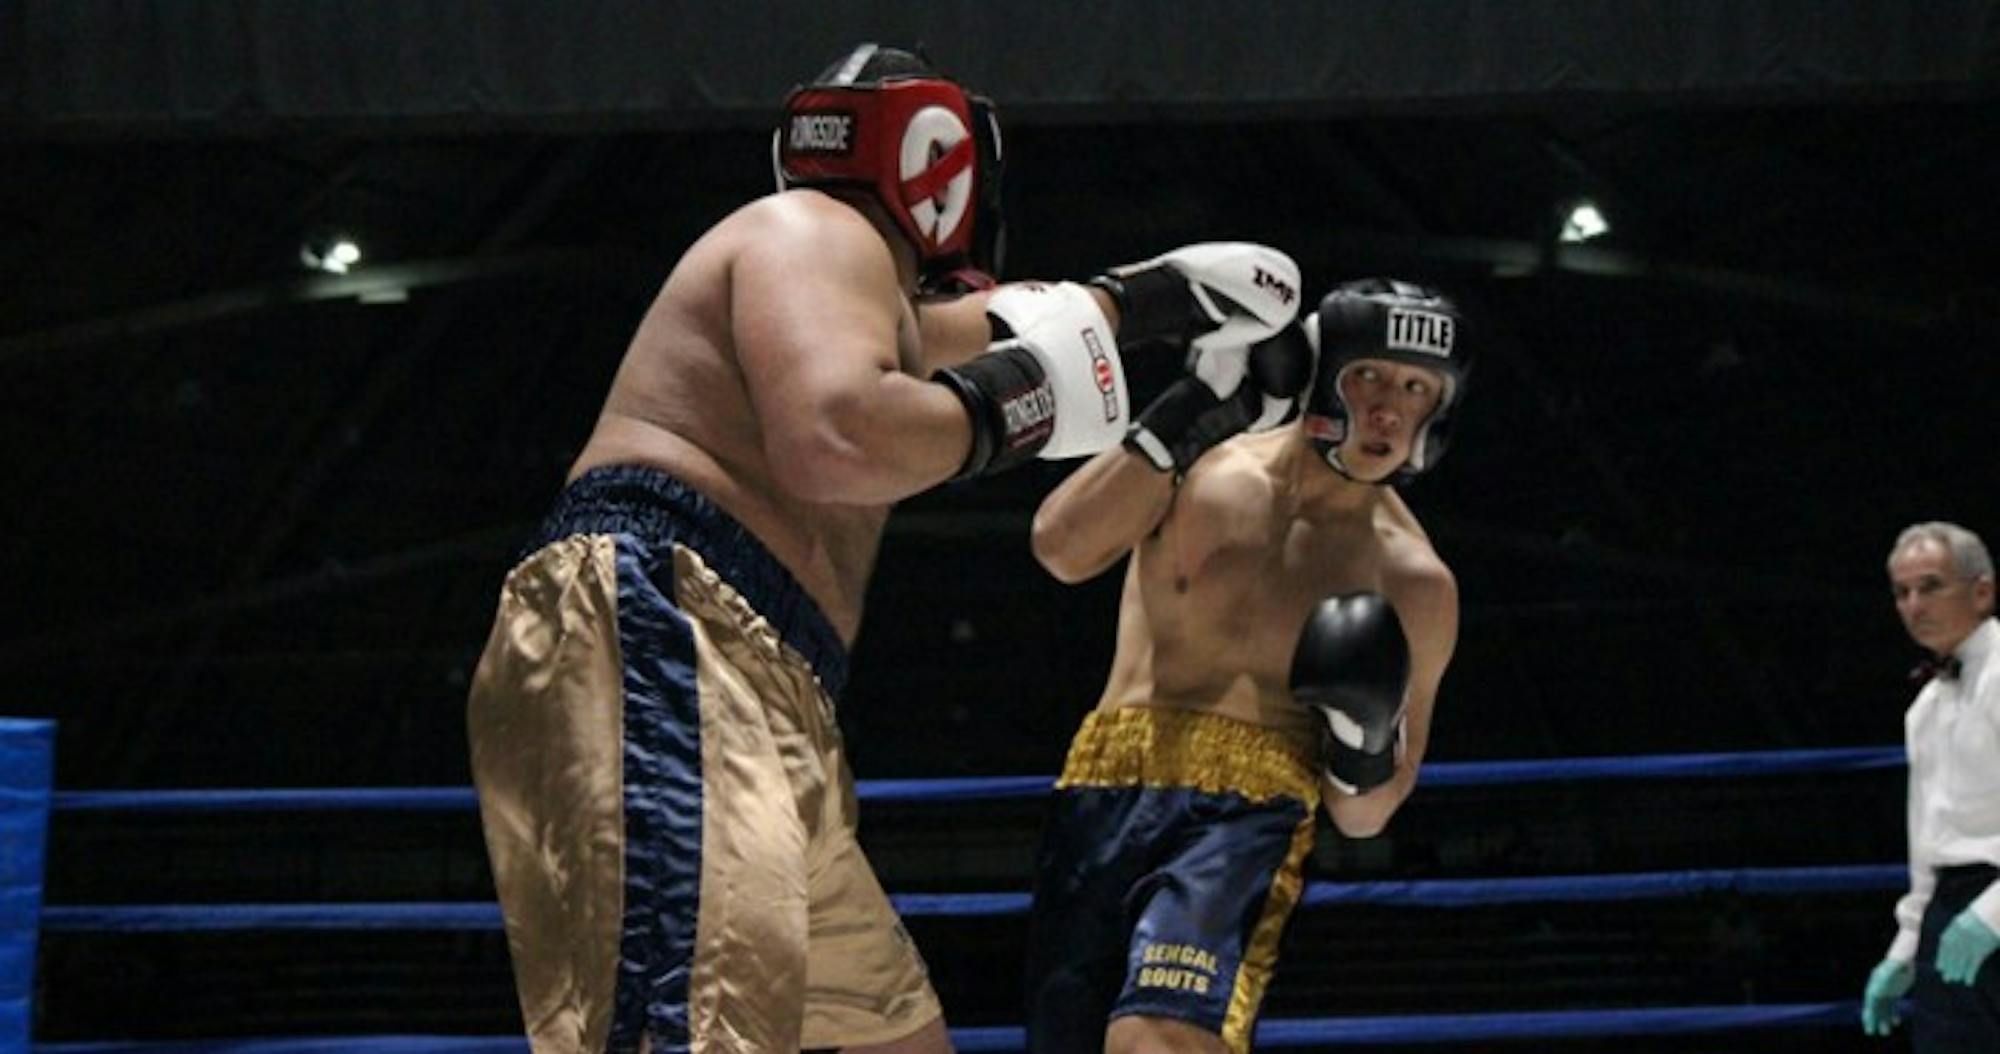 Senior captain and club president Daniel Yi, right, dodges a punch from law student Brian Israel during his victory by unanimous decision in the semifinals on Tuesday. Yi has won three straight Bengal Bouts titles and will go for a historic fourth on Sunday against freshman Erich Jegier.